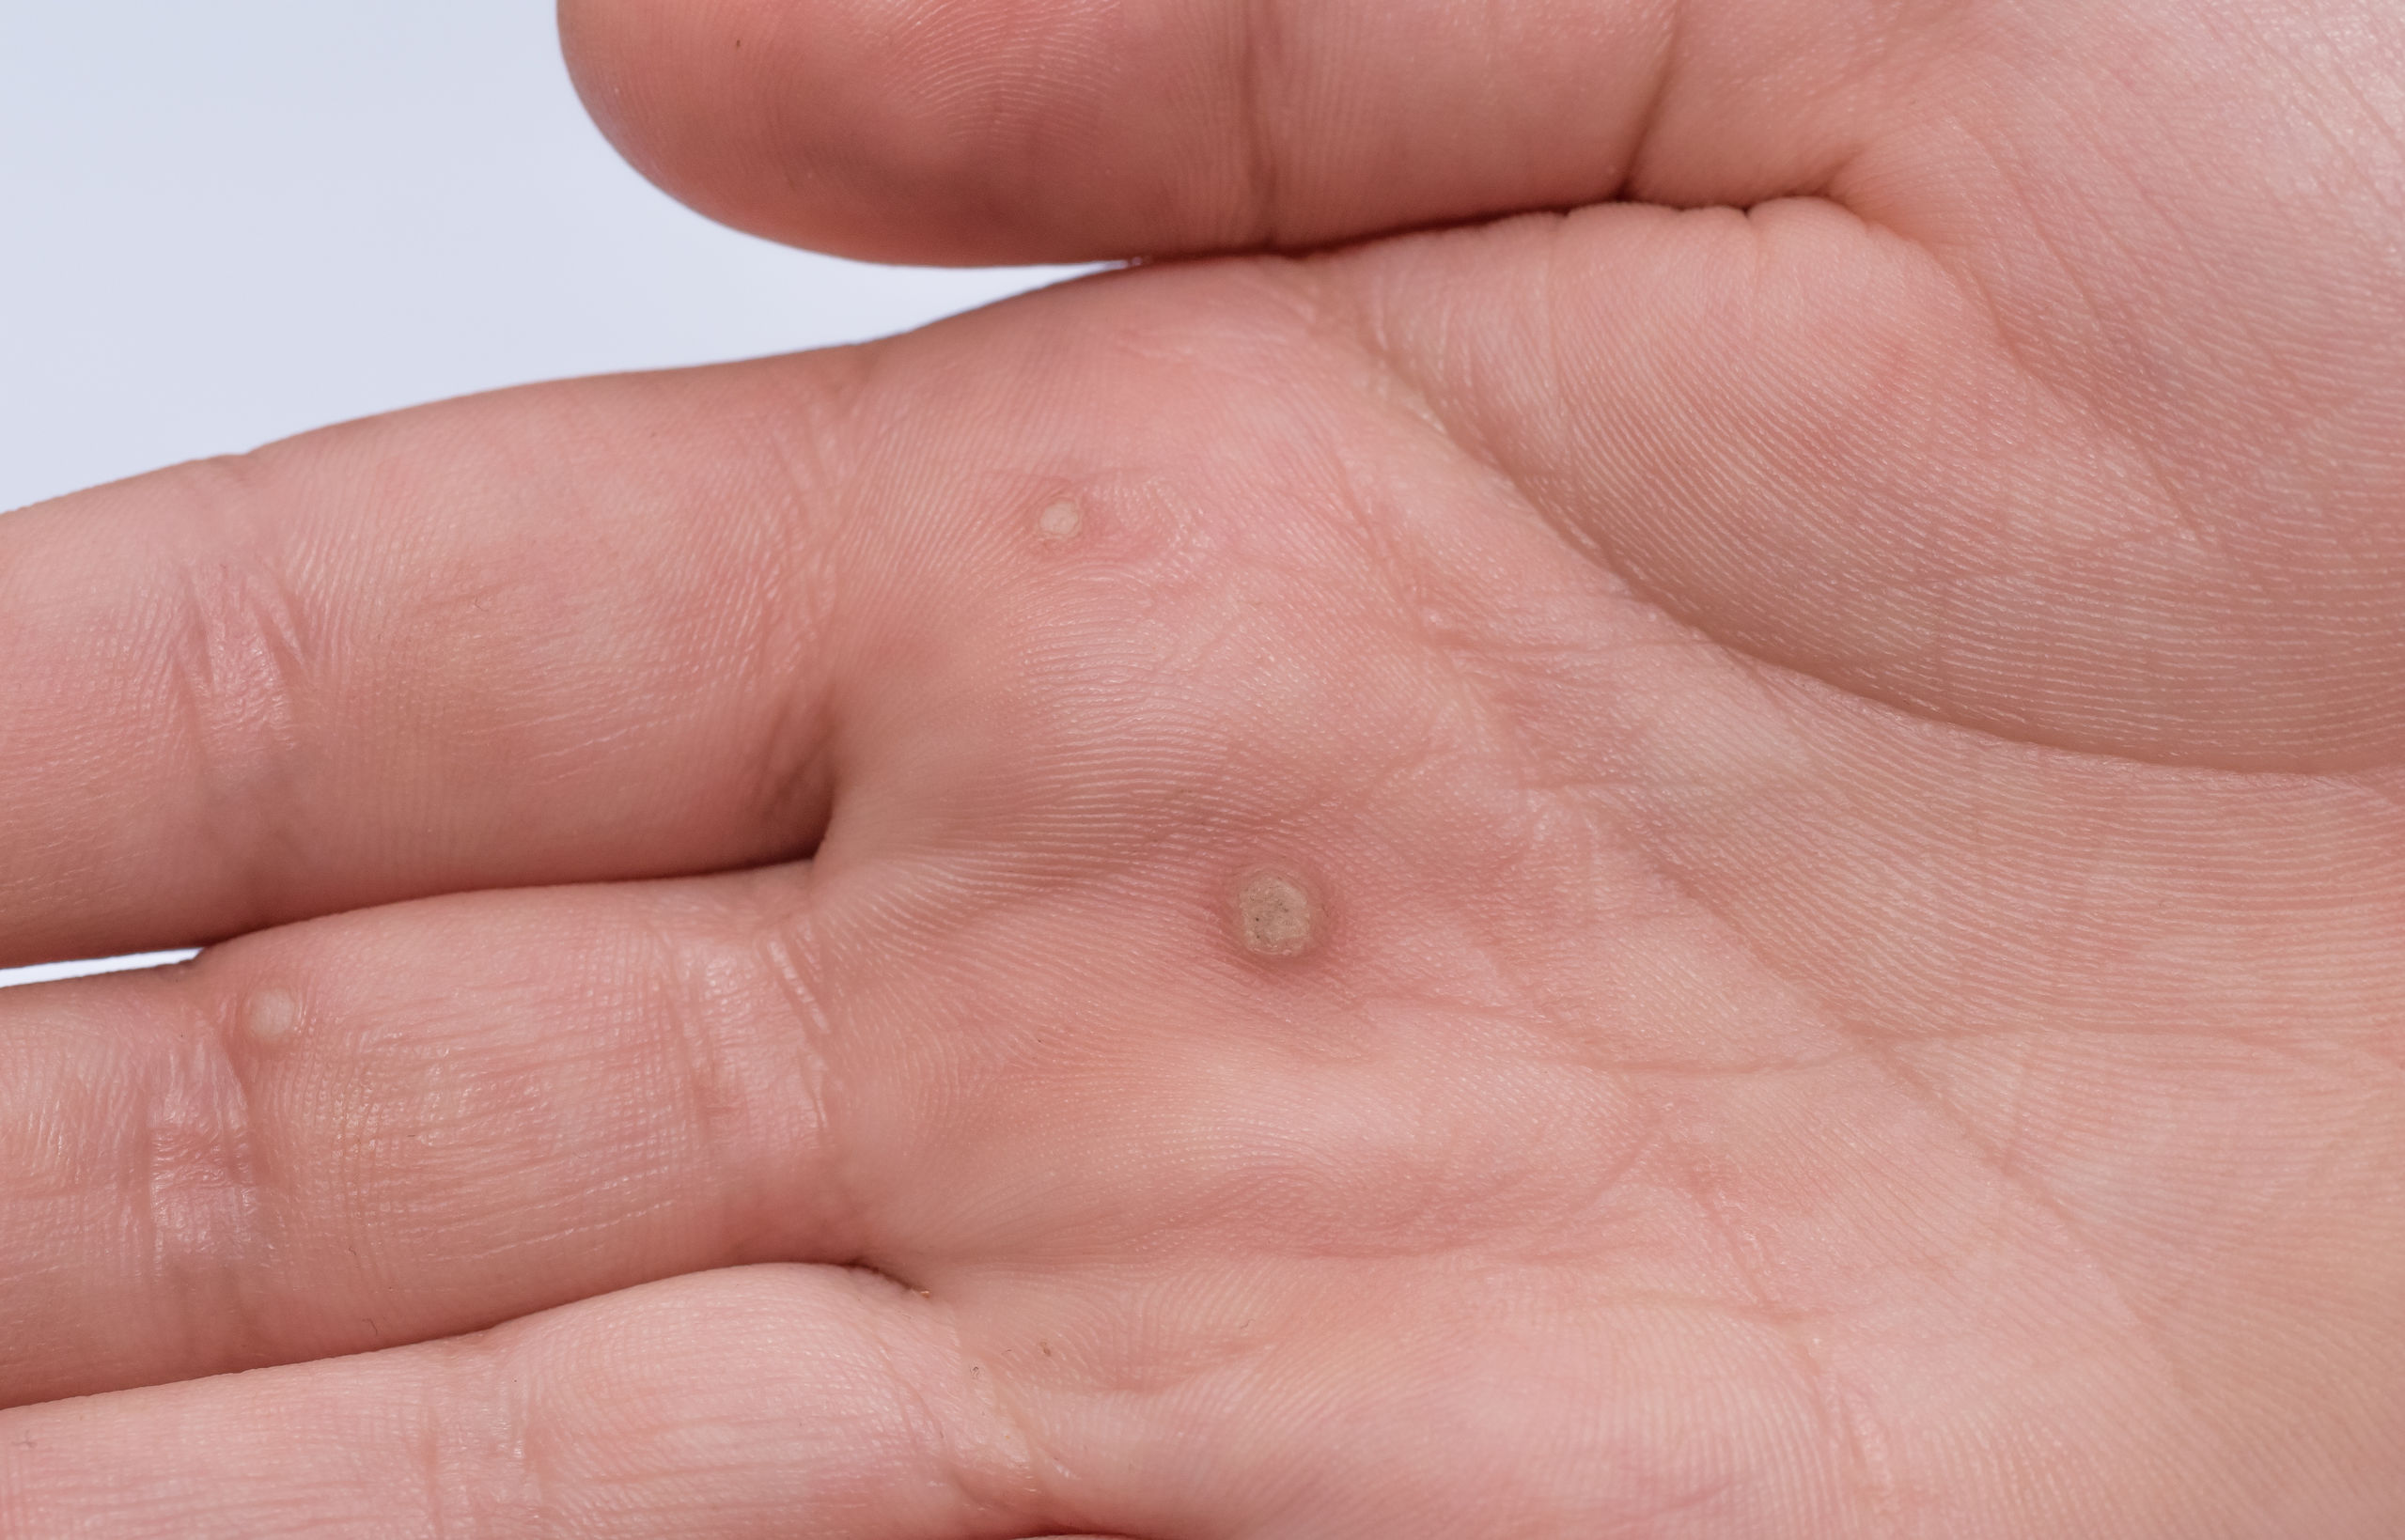 warts on hands small